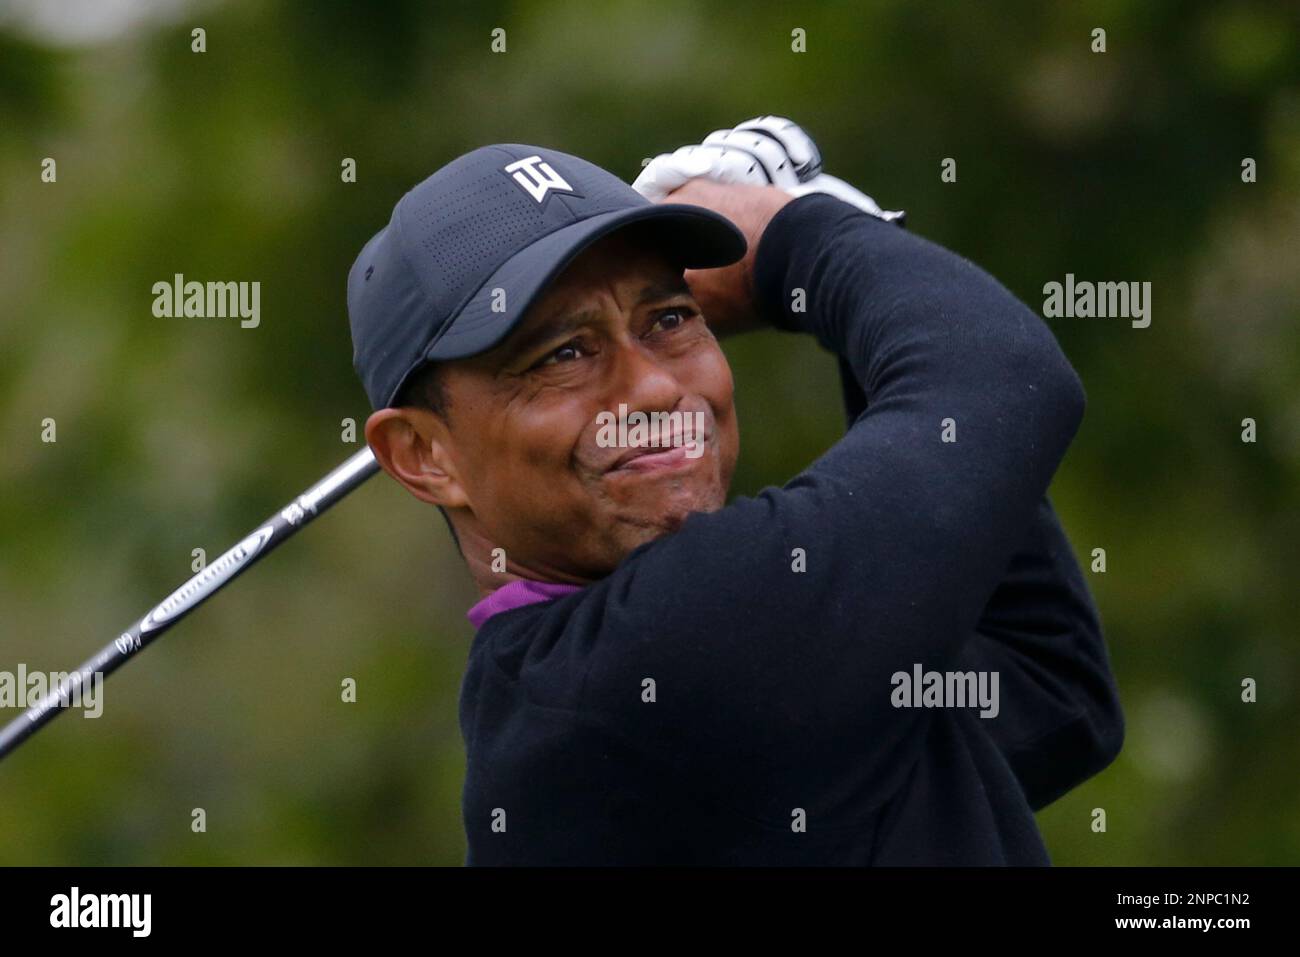 Tiger Woods in actions during the second round of the Zozo Championship golf tournament Friday, Oct